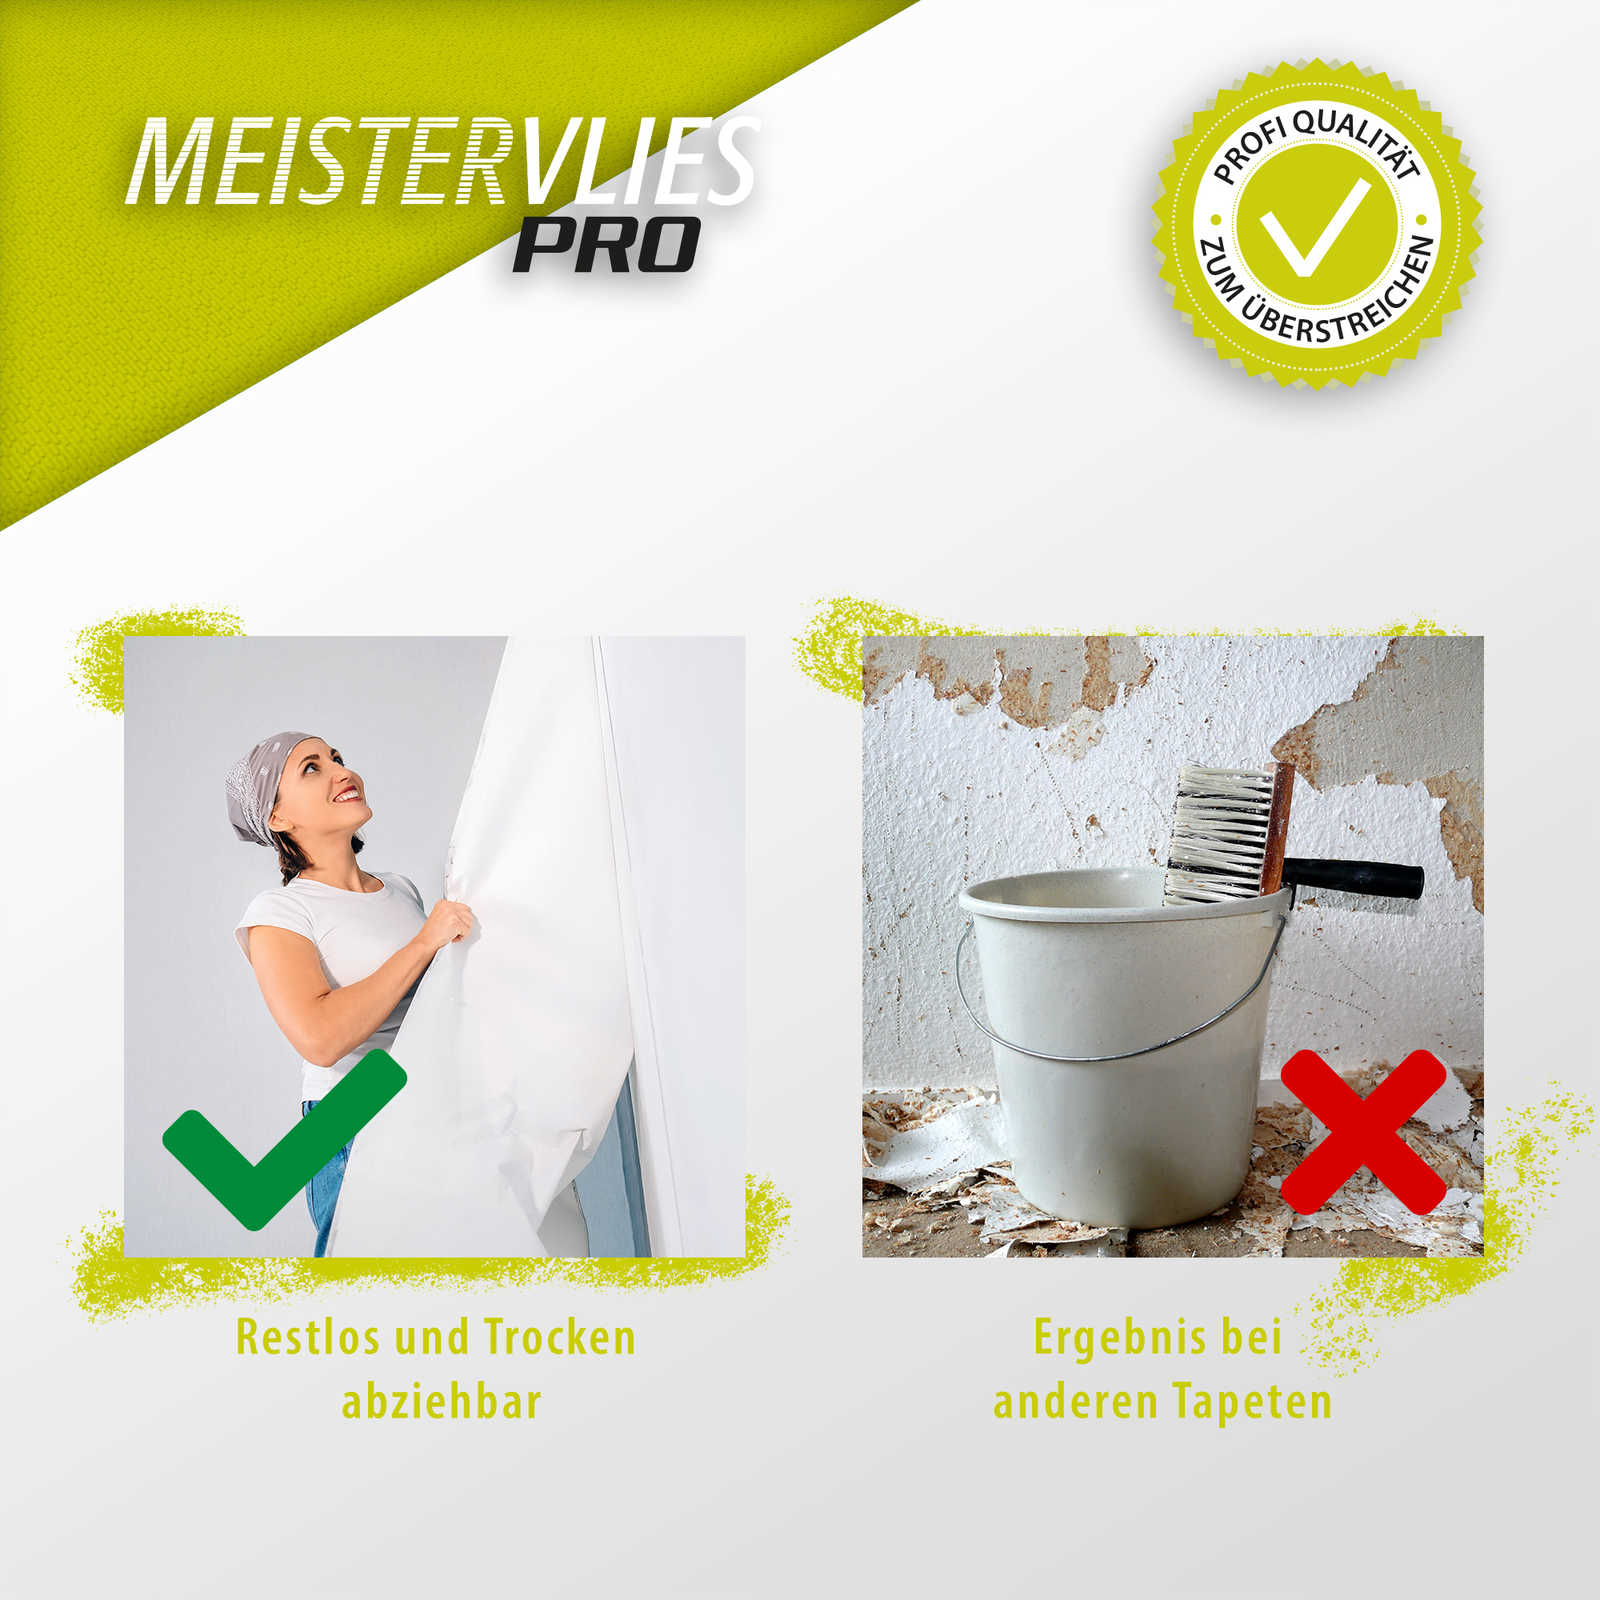             Meistervlies wallpaper white flat surface, paintable
        